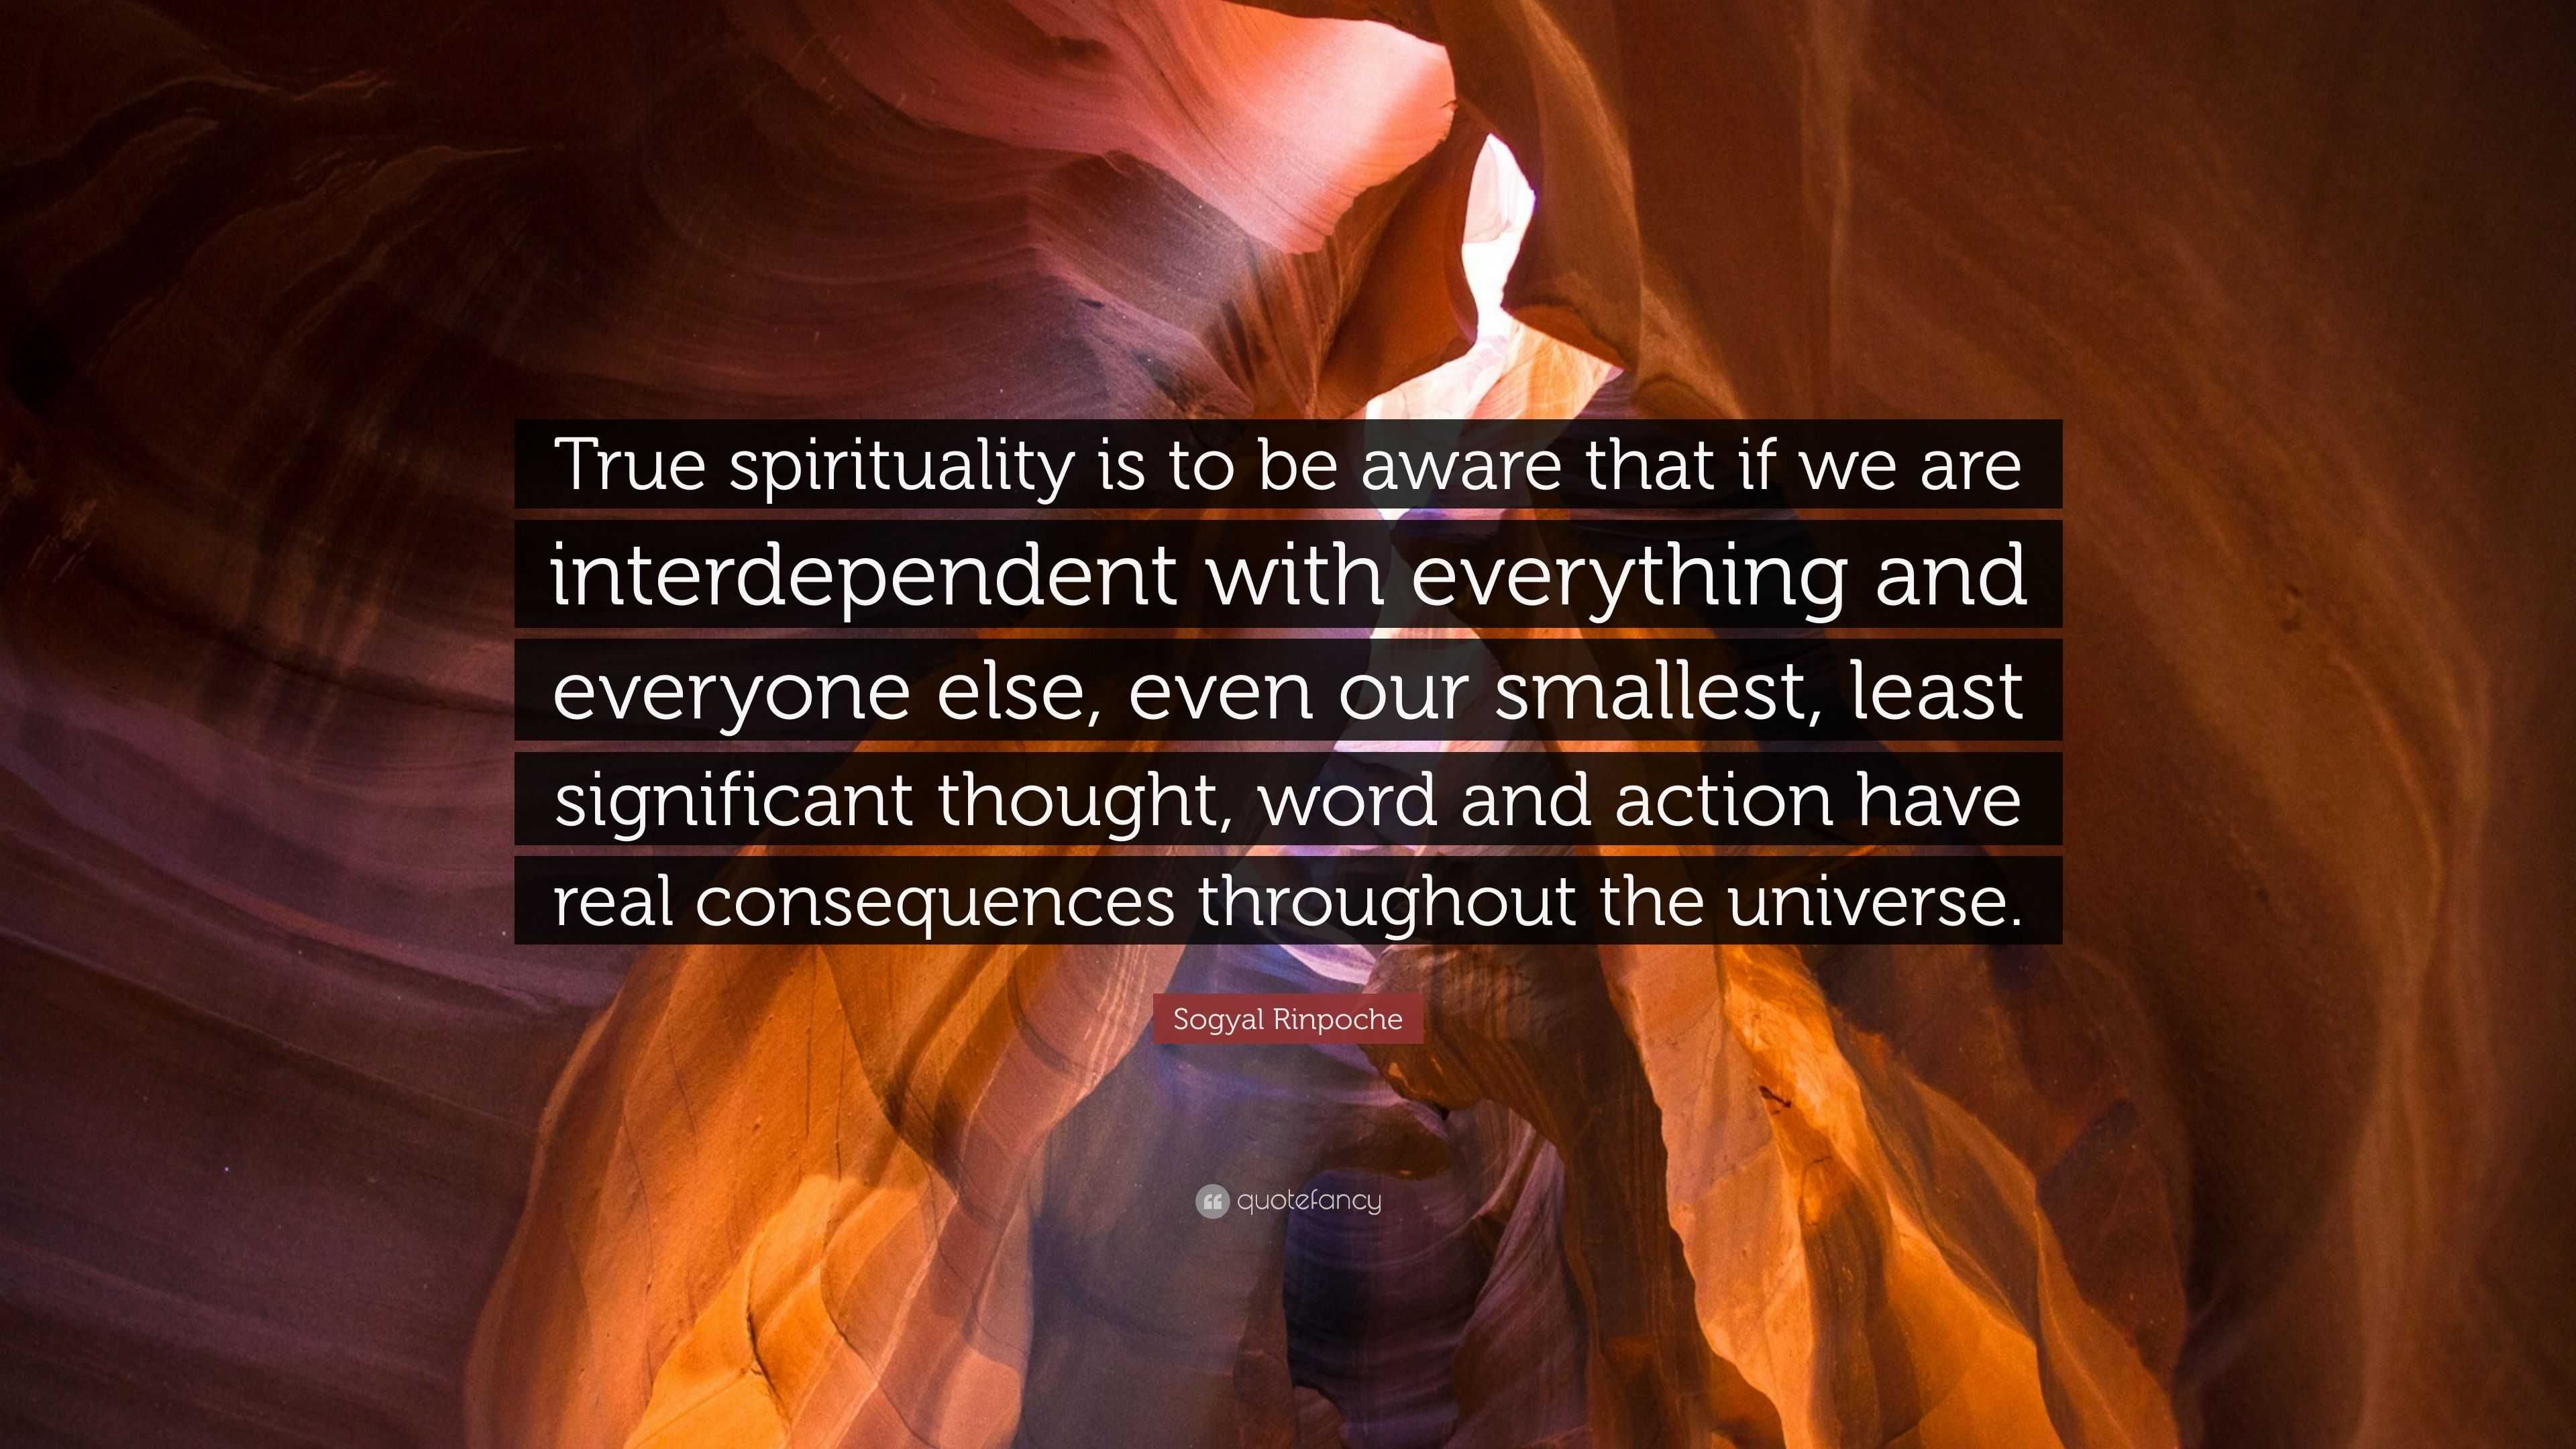 4843030-Sogyal-Rinpoche-Quote-True-spirituality-is-to-be-aware-that-if-we.jpg